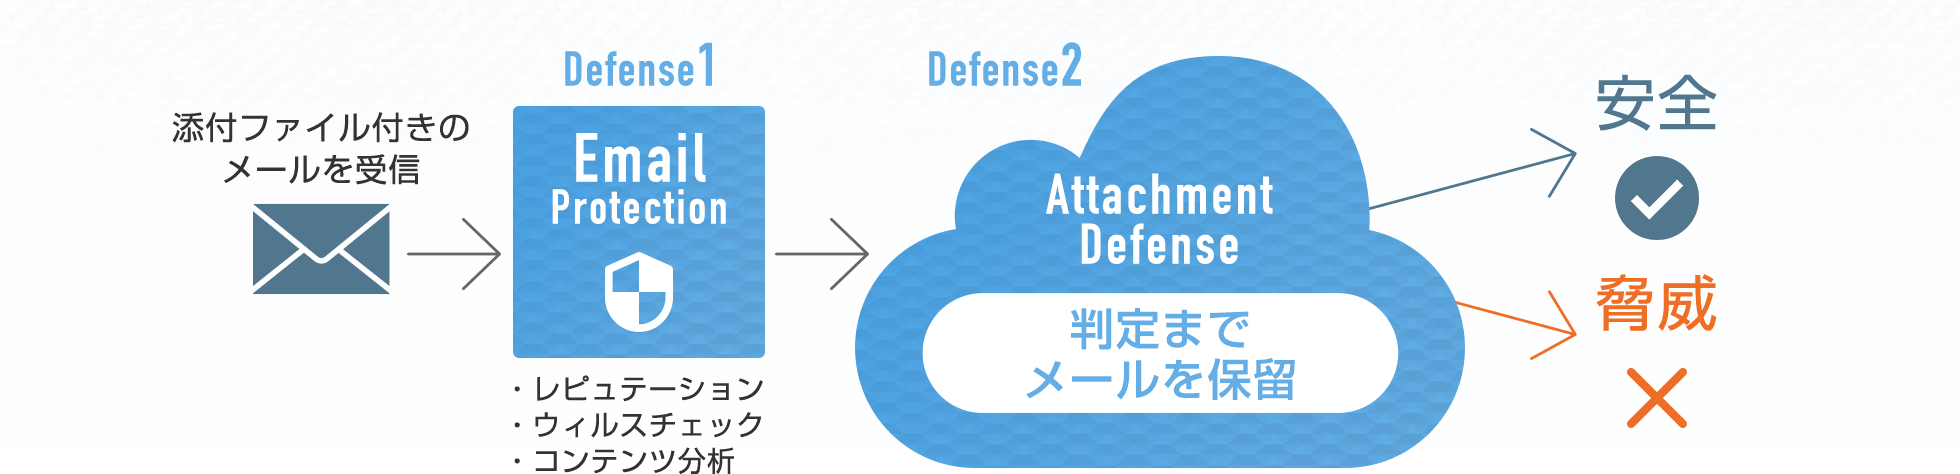 EmailProtection、AttachmentDefence